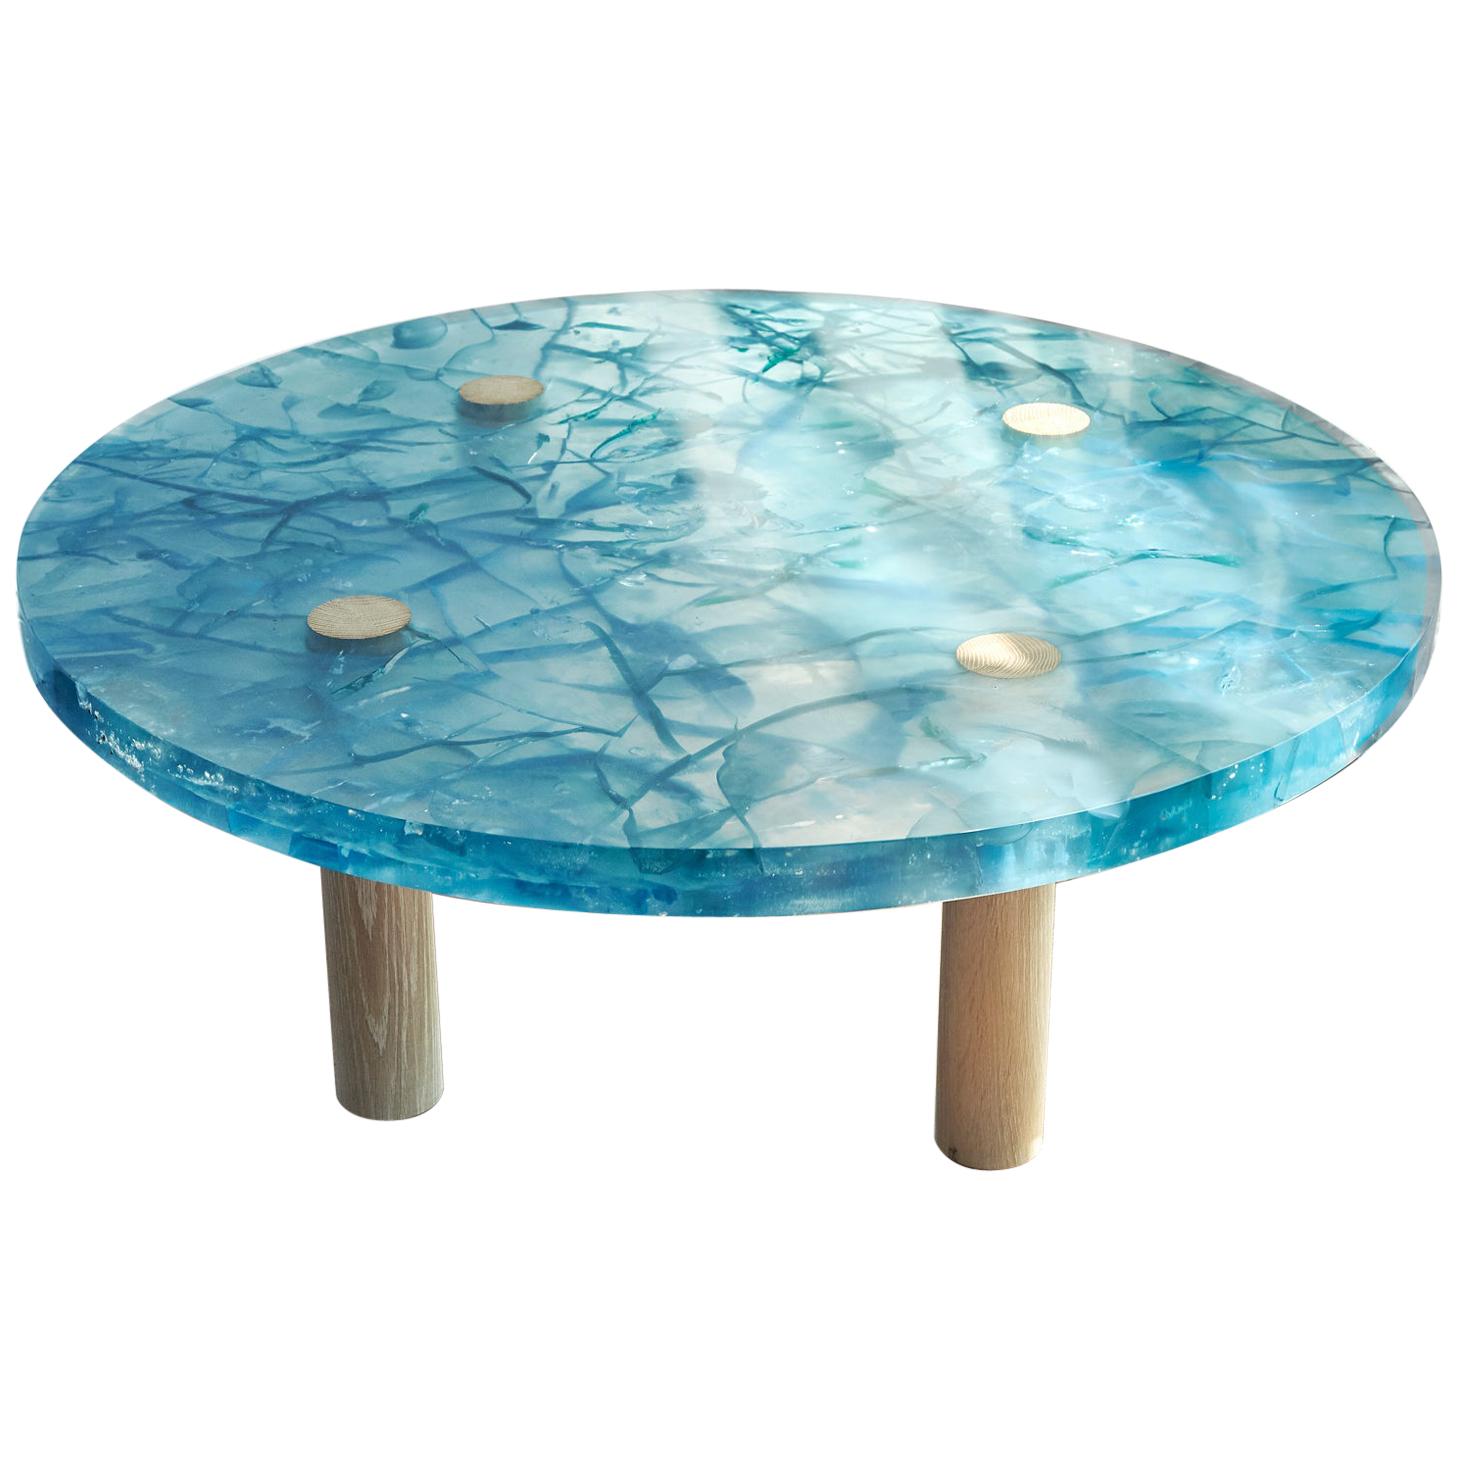 Handmade Blue Resin Coffee Table with Wood Legs For Sale